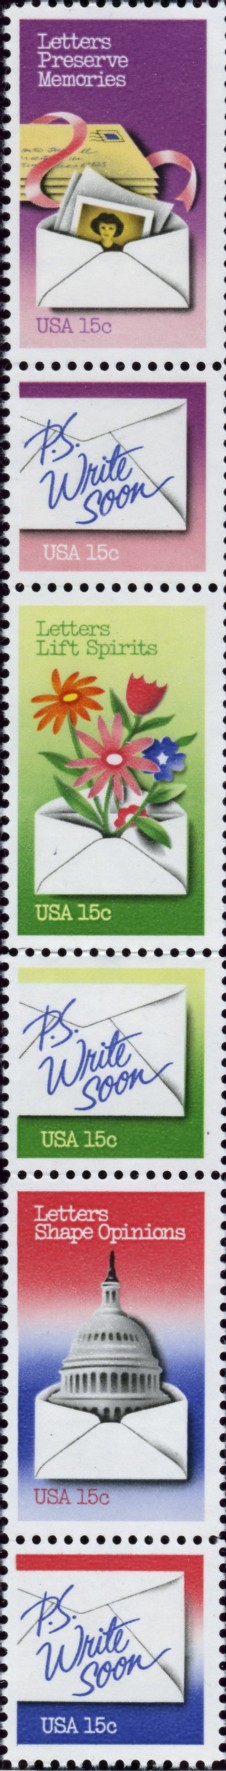 Scott 1805 to 1810 15 Cent Stamps Letter Writing